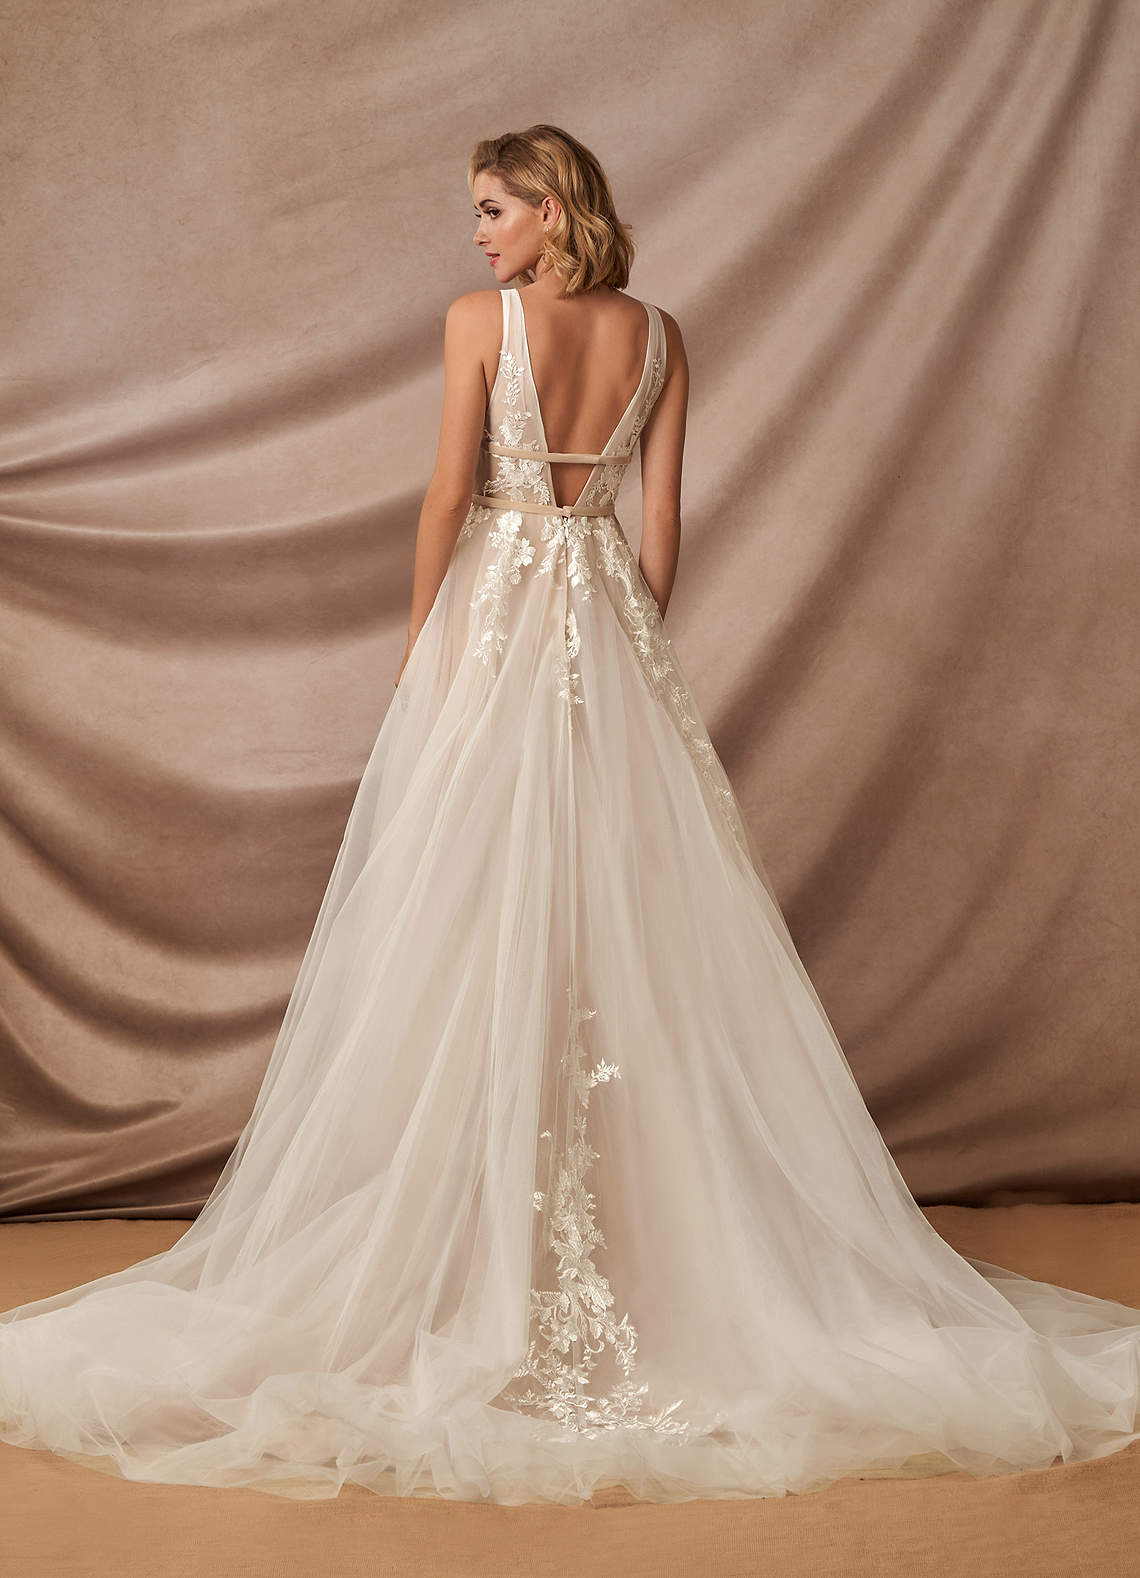 Nora Wedding Dress with Tulle Train and Lace accents on bodice